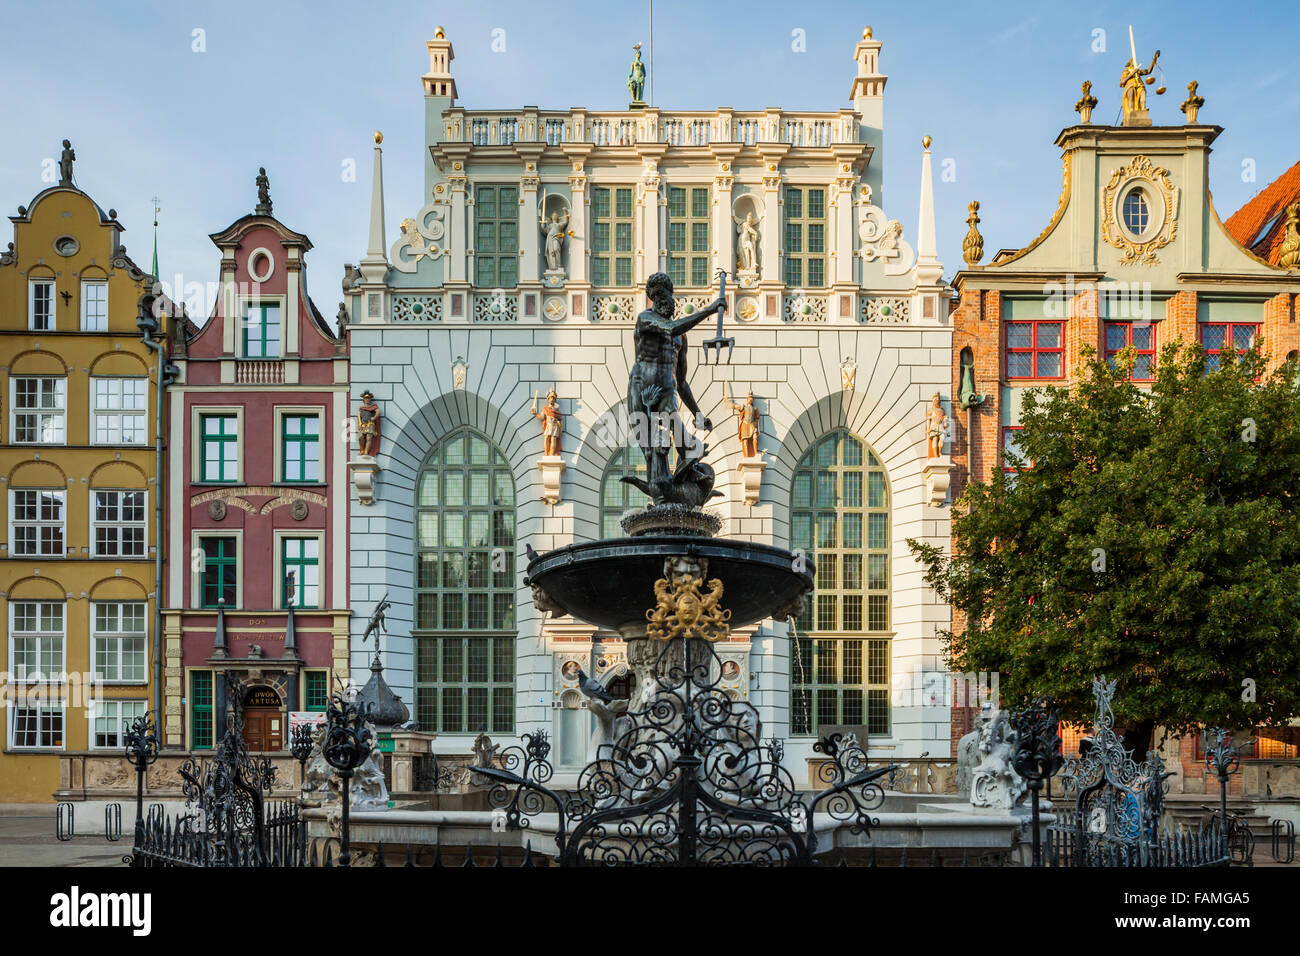 Neptune's statue and fountain in front of Artus Manor in Gdansk old town, Poland. Stock Photo